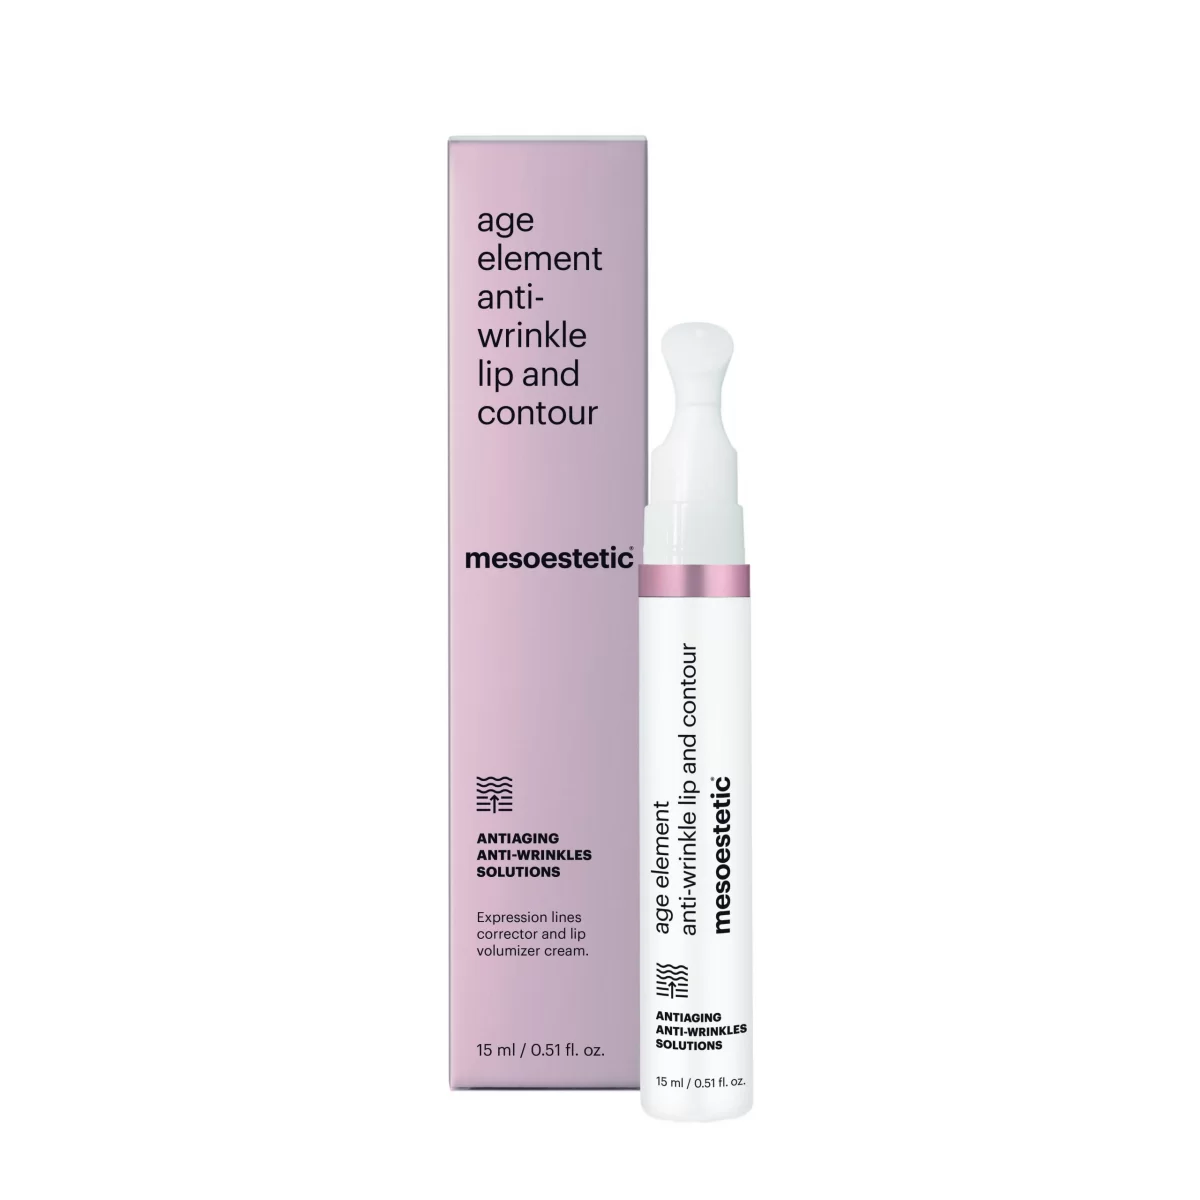 Mesoestetic – Age Element – Antiwrinkle Lip & Contour [1]